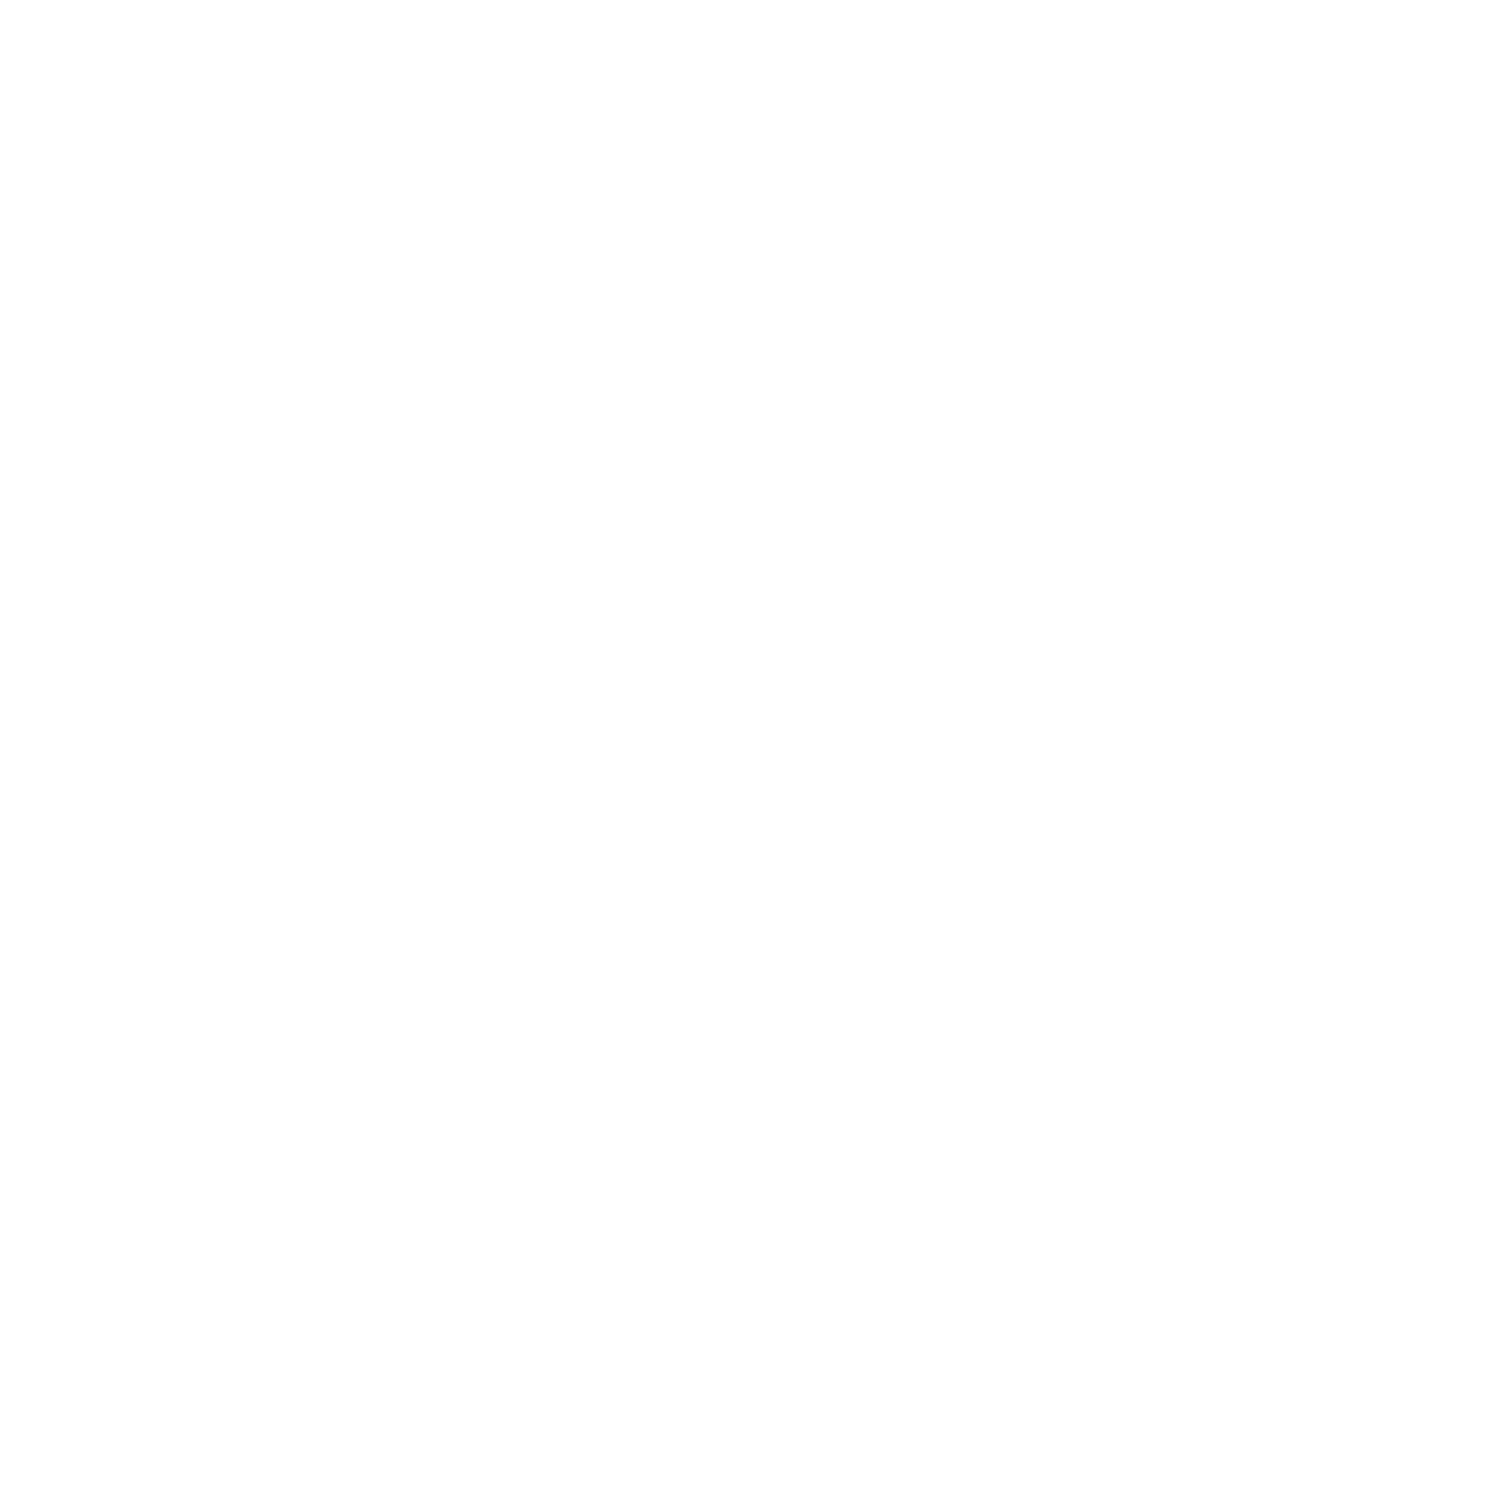 Designs Made Well